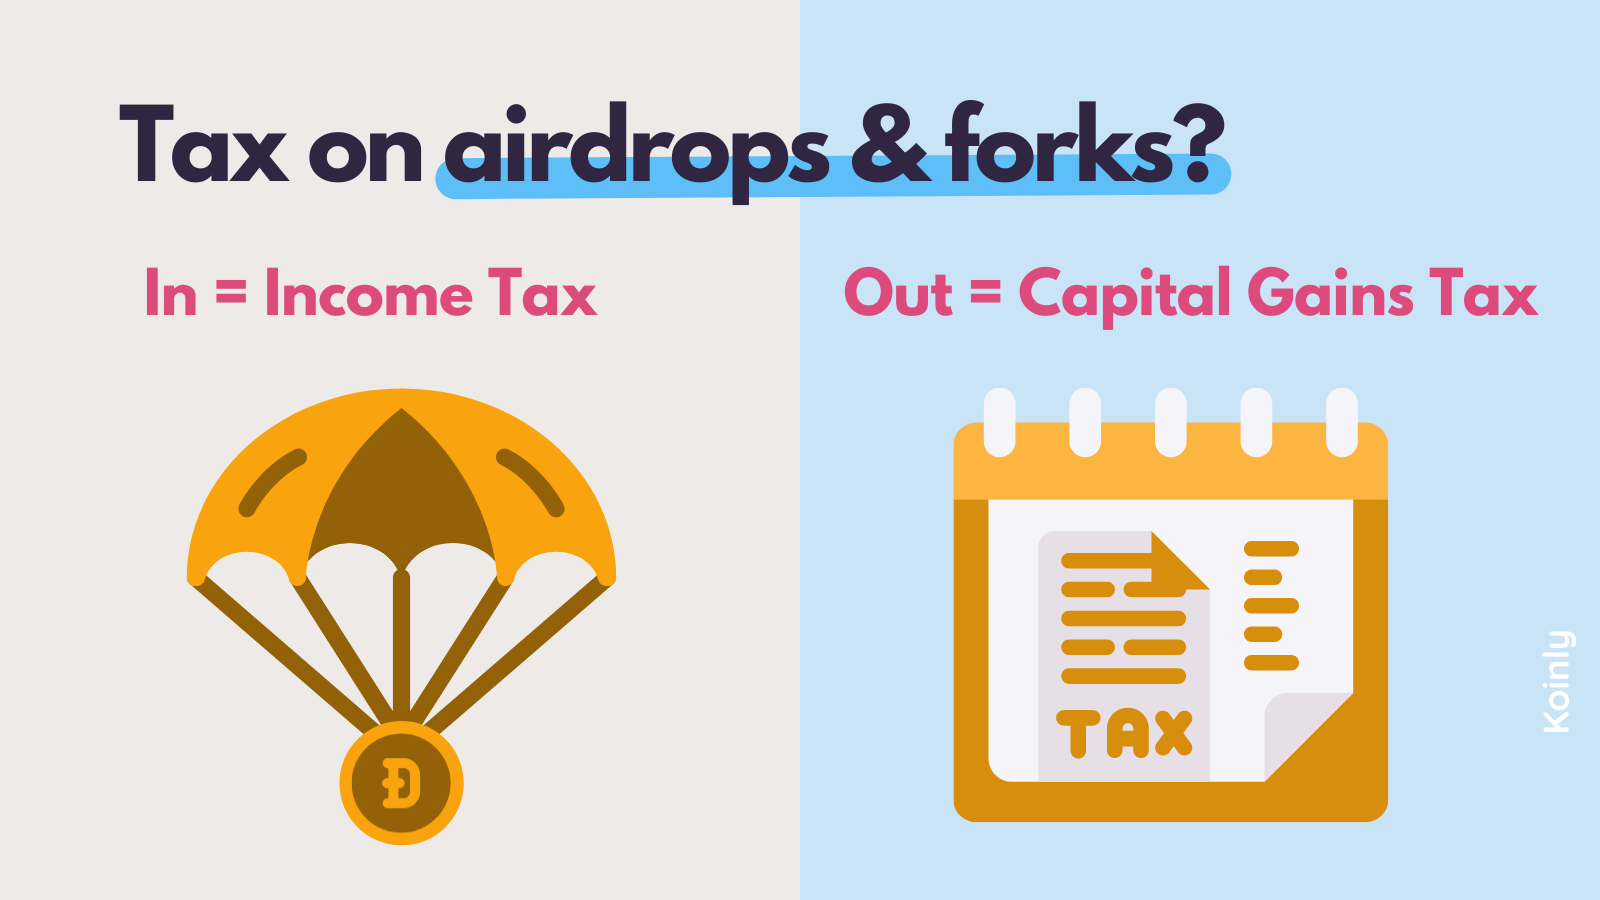 airdrop and forks tax in the US